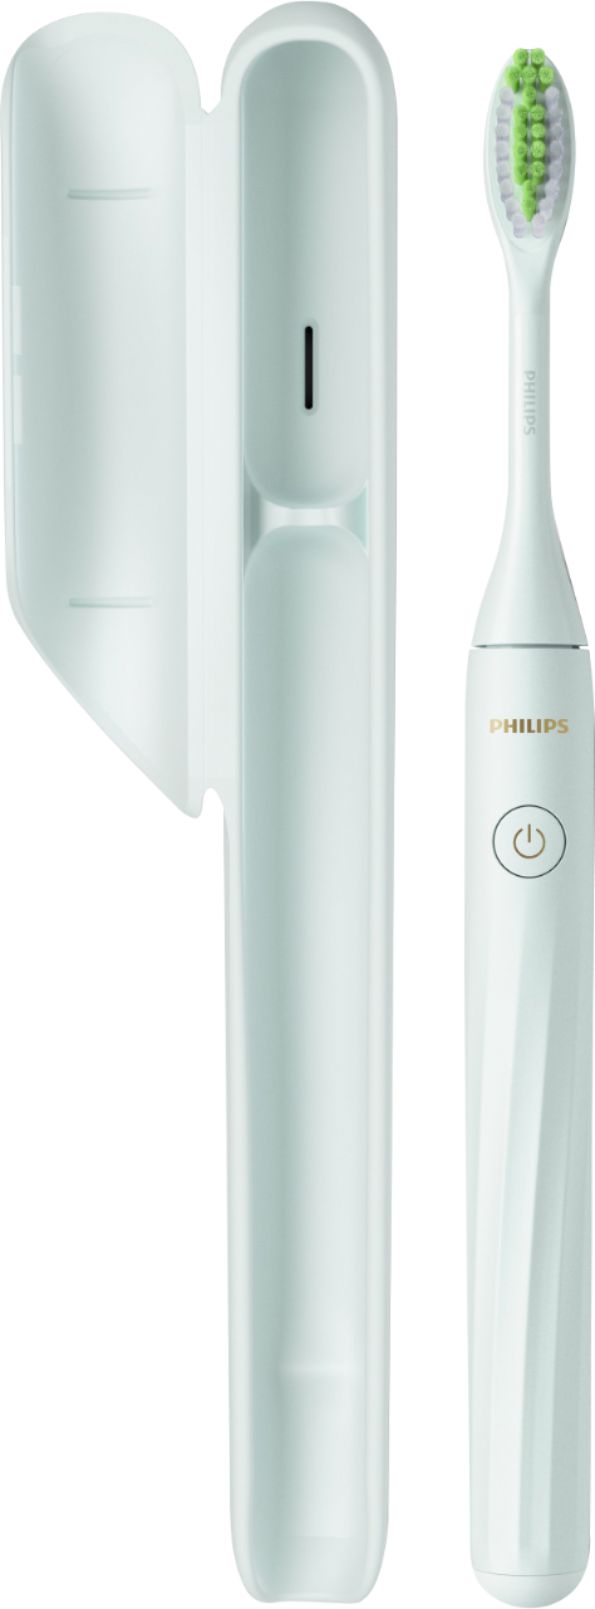 Angle View: Philips Sonicare - Philips One by Sonicare Battery Toothbrush - Mint